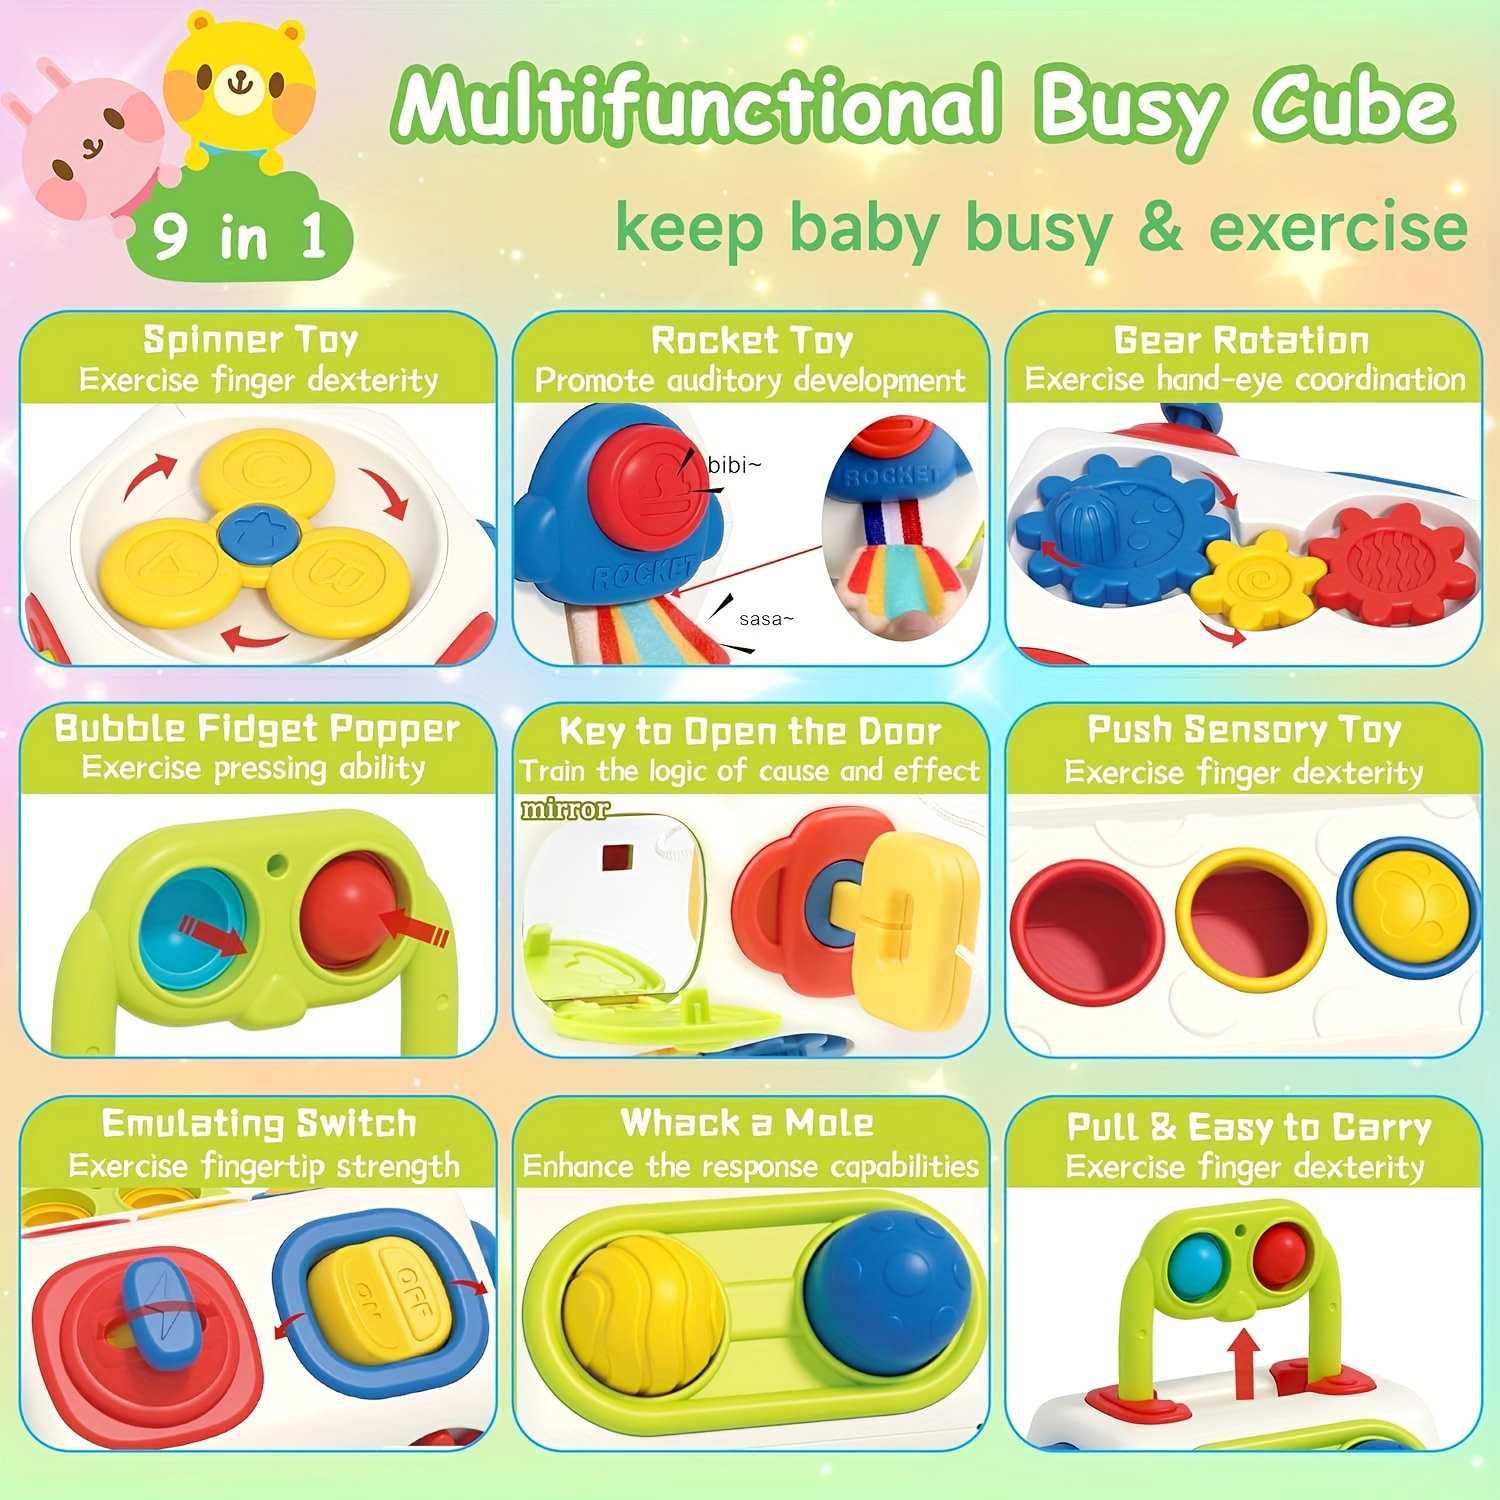 Montessori Sensory Toys For Toddlers 1-3 - Travel Activities Busy Board  Cube - Baby Gifts For 6 9 12 18 Months 1 2 One Year Old Infant Boys Girls -  Ai